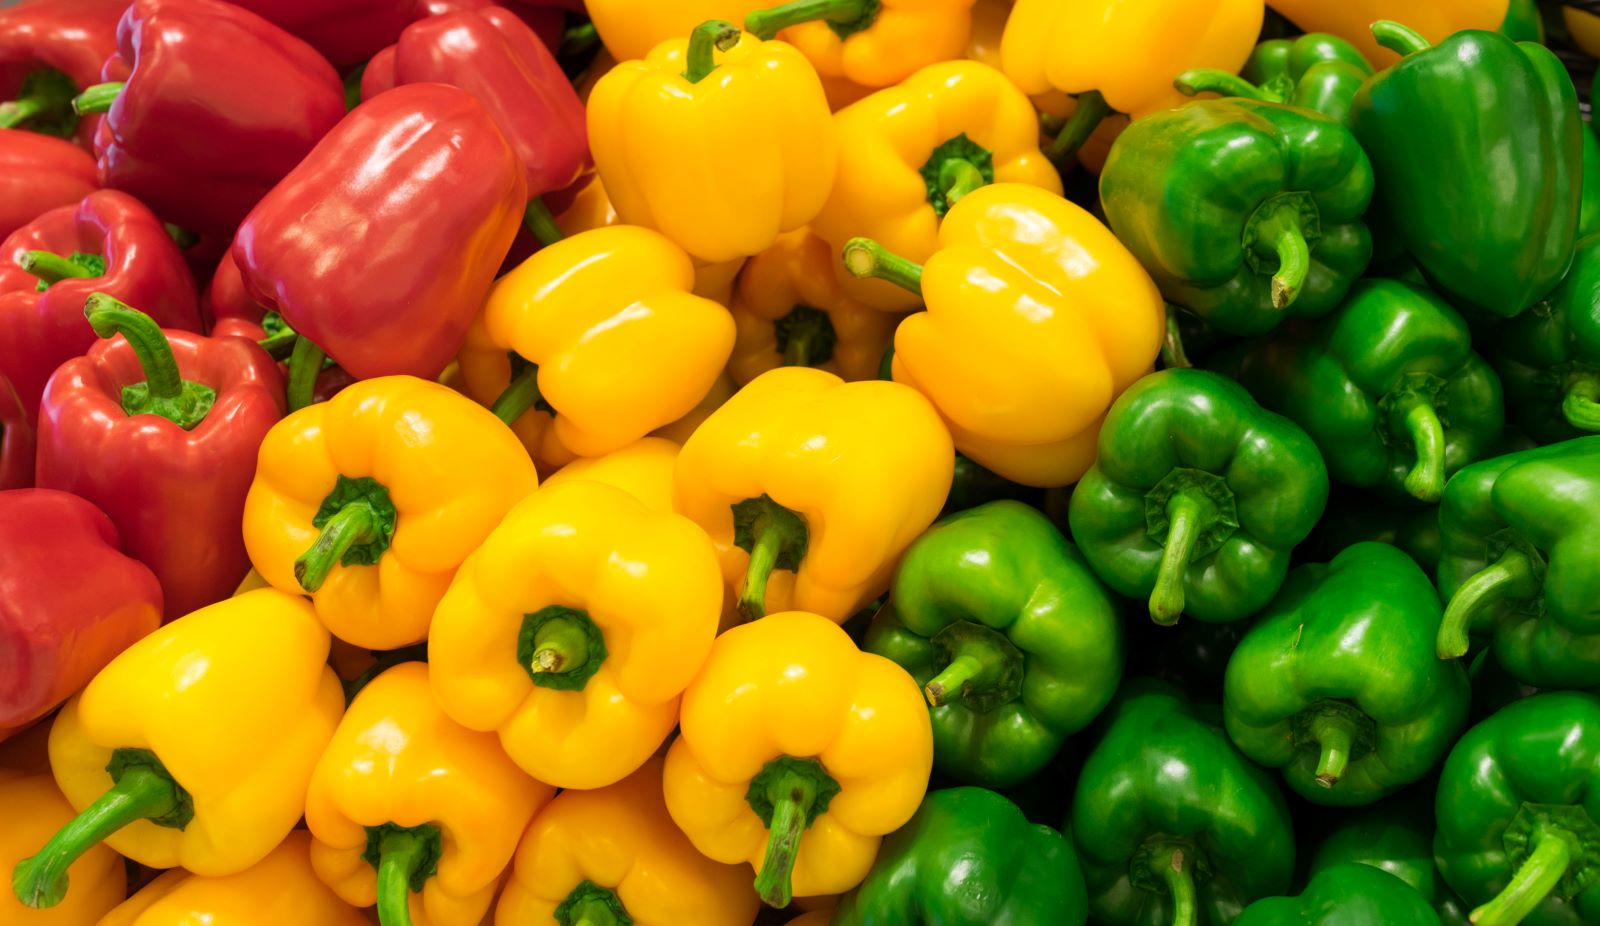 Nutrition Smack Down: Which Color Bell Peppers Are the Healthiest?